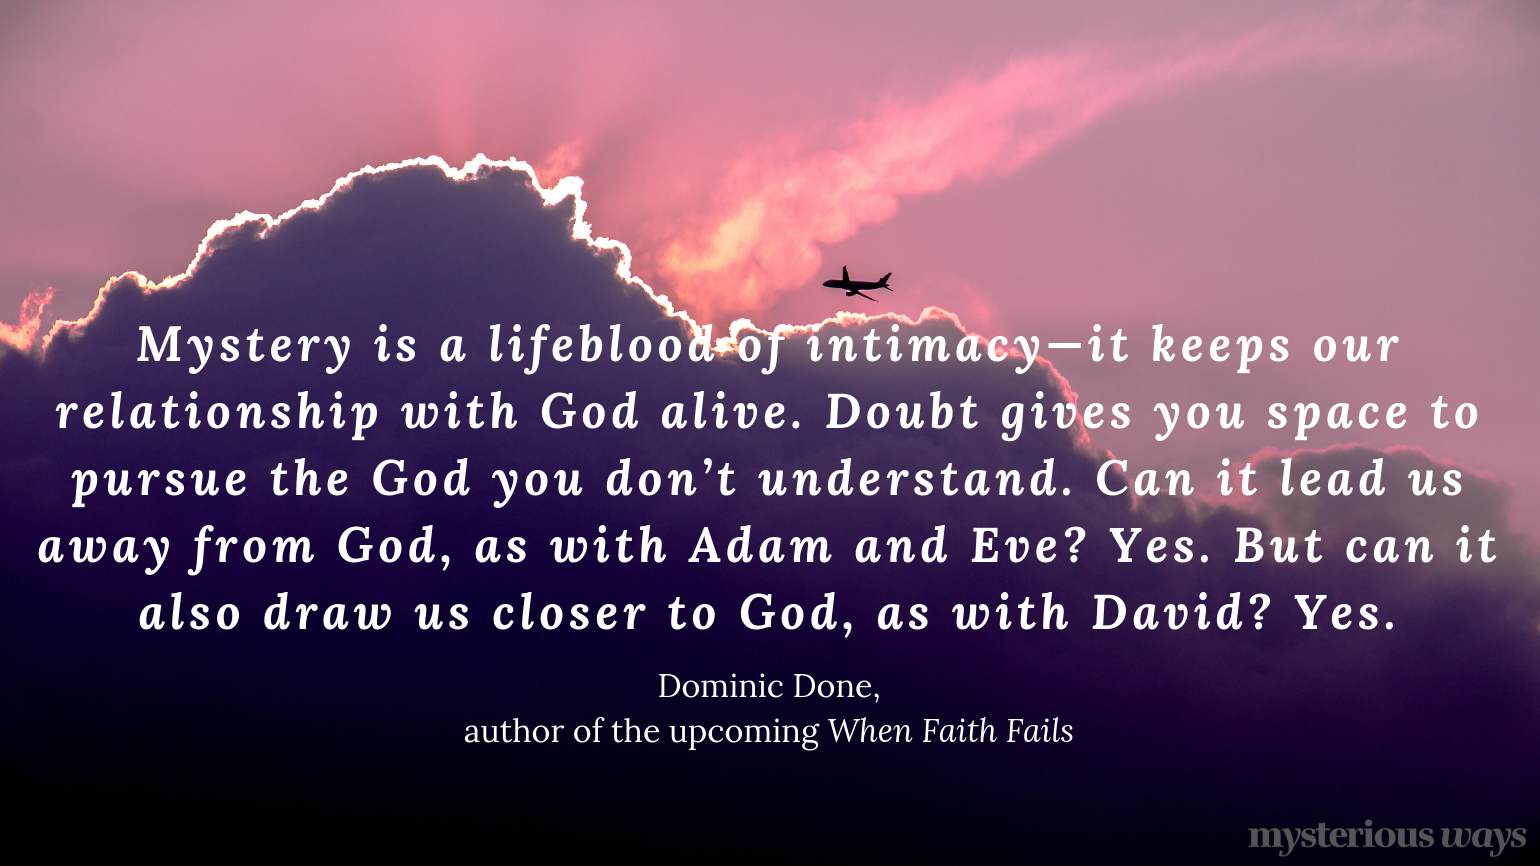 “Mystery is a lifeblood of intimacy—it keeps our relationship with God alive. Doubt gives you space to pursue the God you don’t understand. Can it lead us away from God, as with Adam and Eve? Yes. But can it also draw us closer to God, as with David? Yes.”